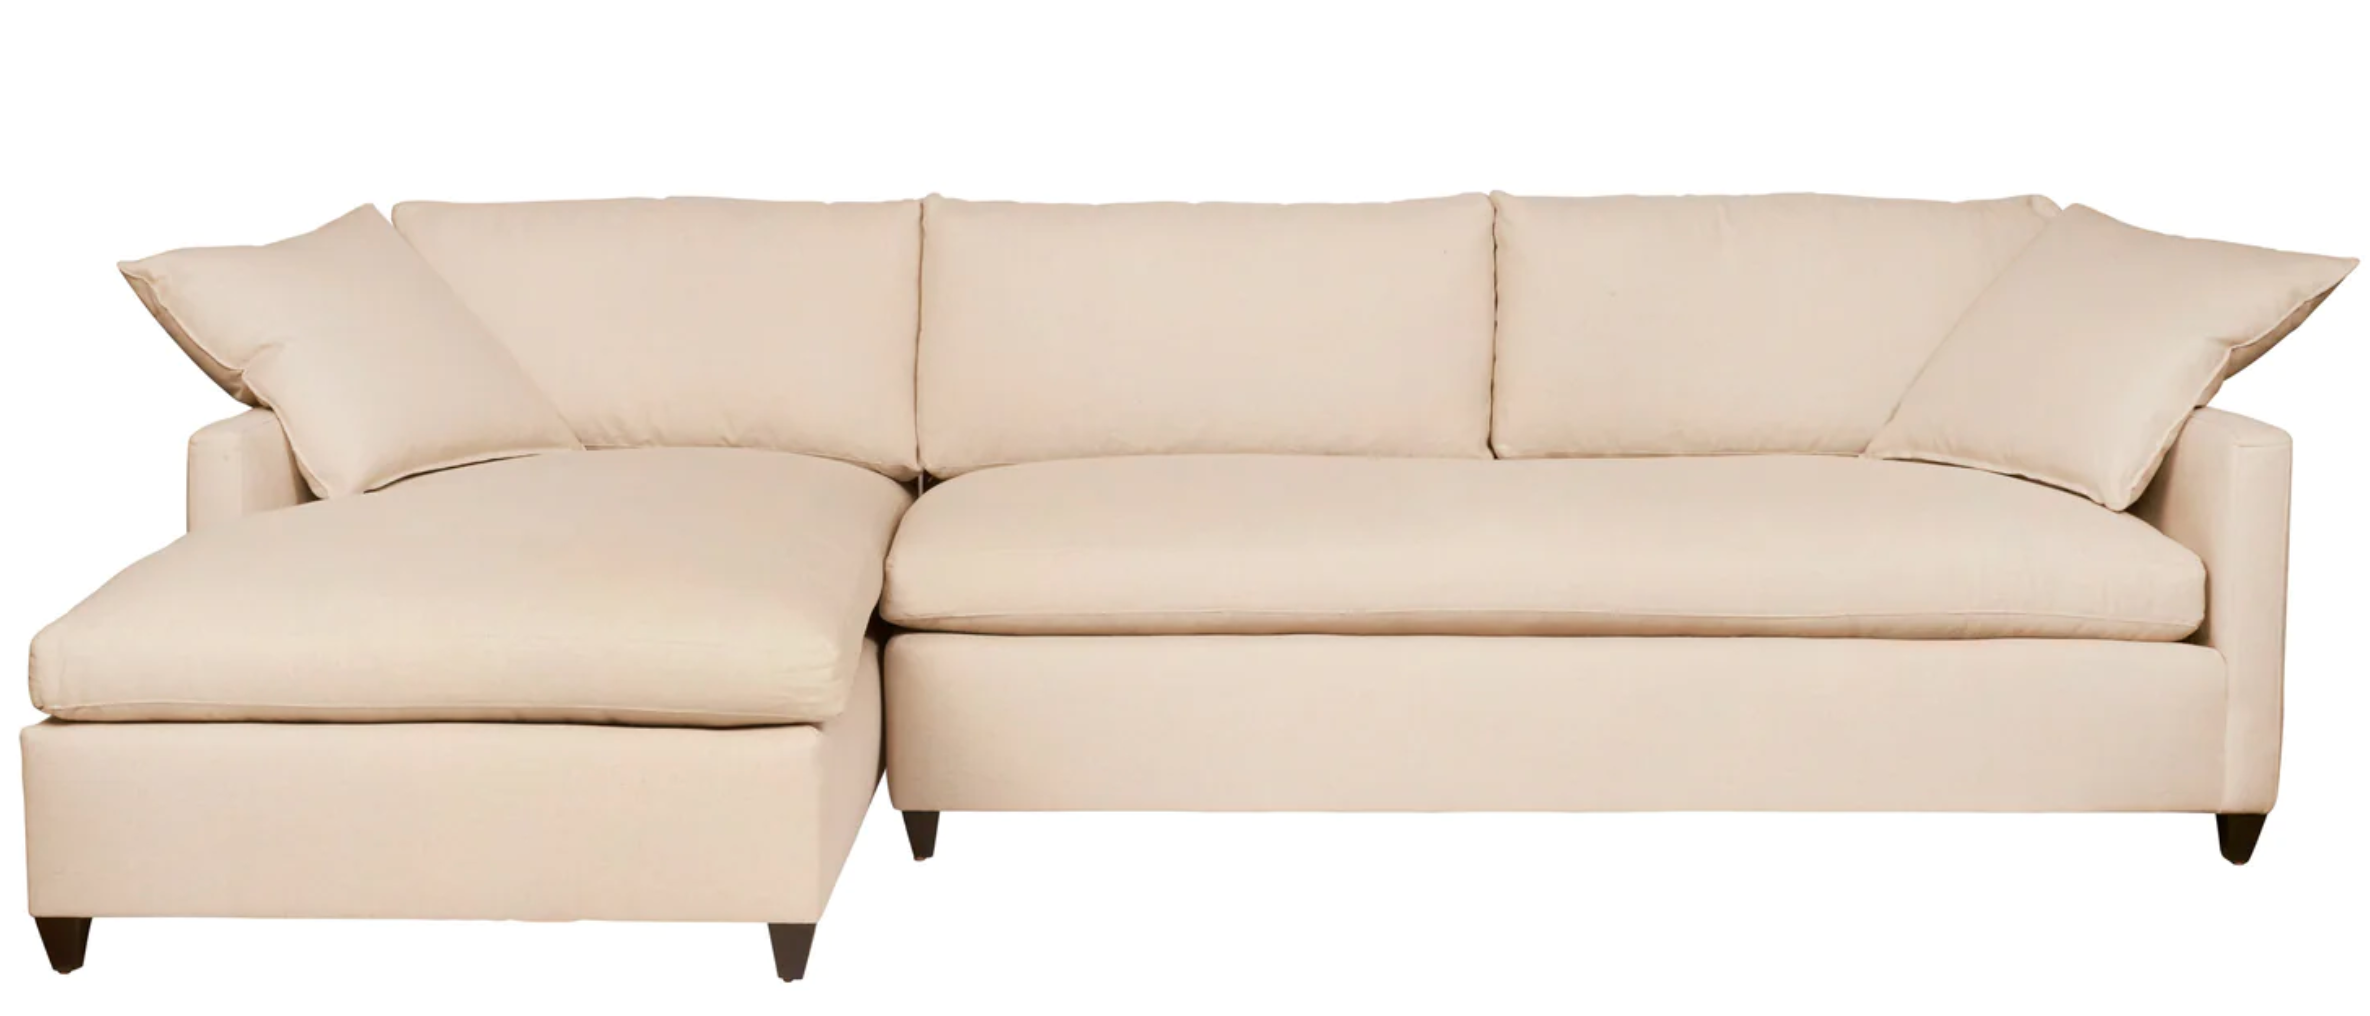 "Essentials" Louis 2pc Sectional, Tier 1 Fabric